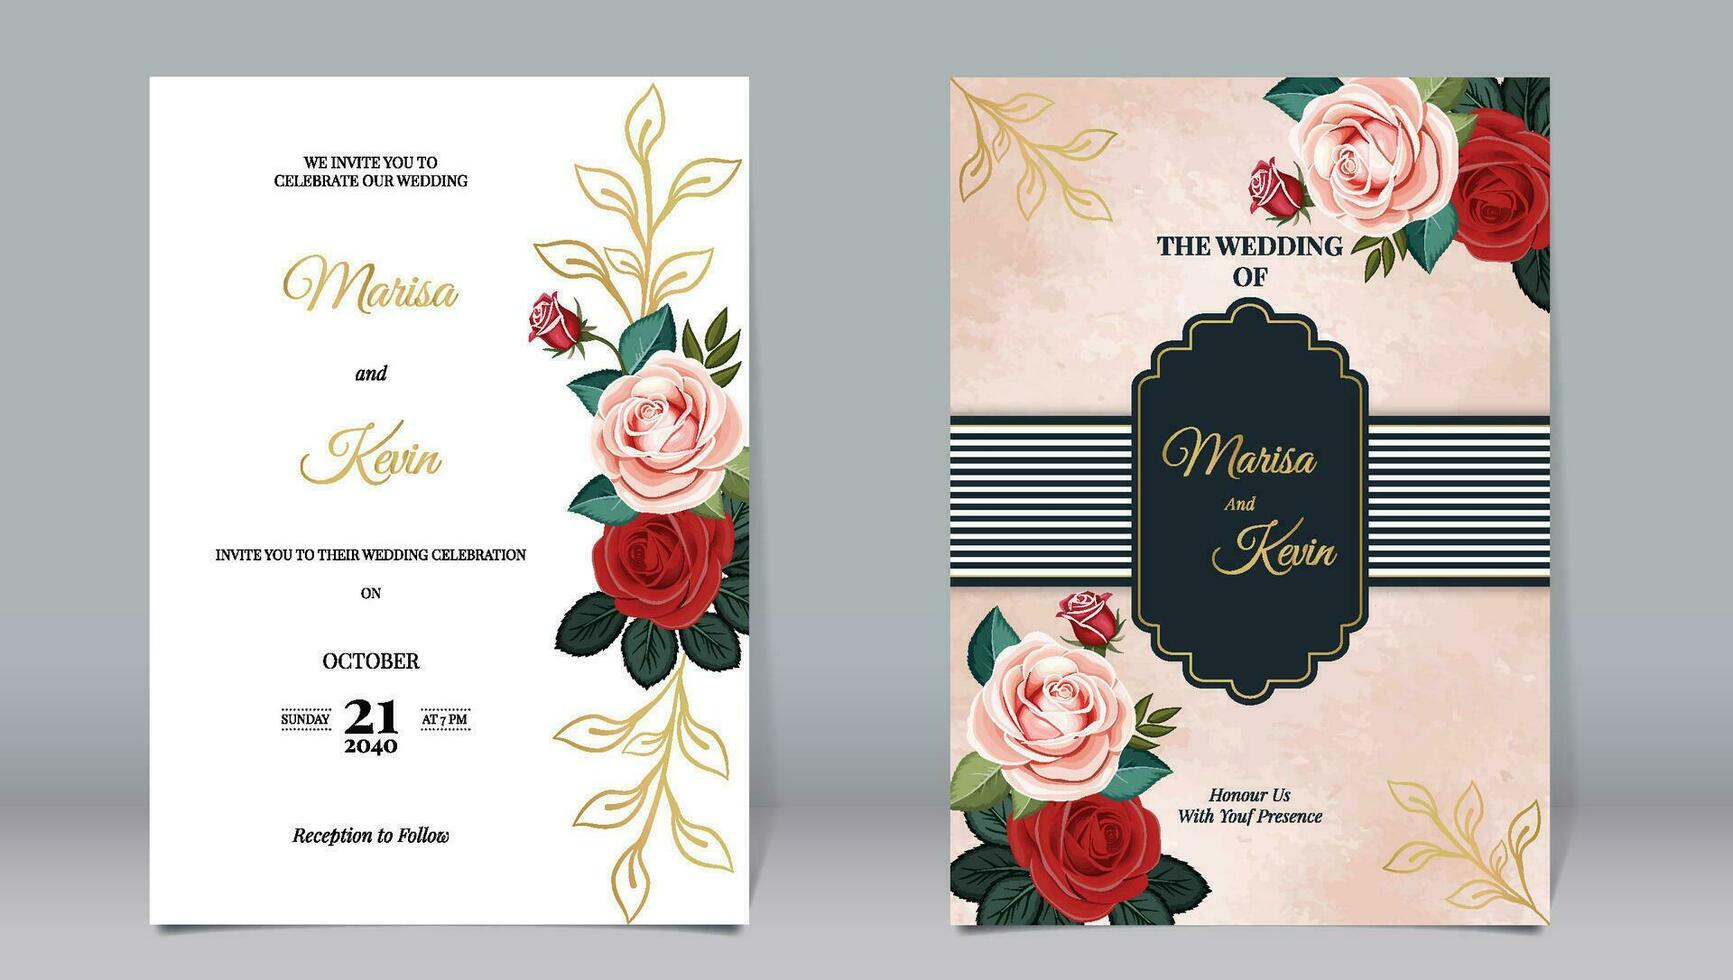 Luxury wedding invitation pink rose flowers and gold carved elements decorated with watercolor background vector